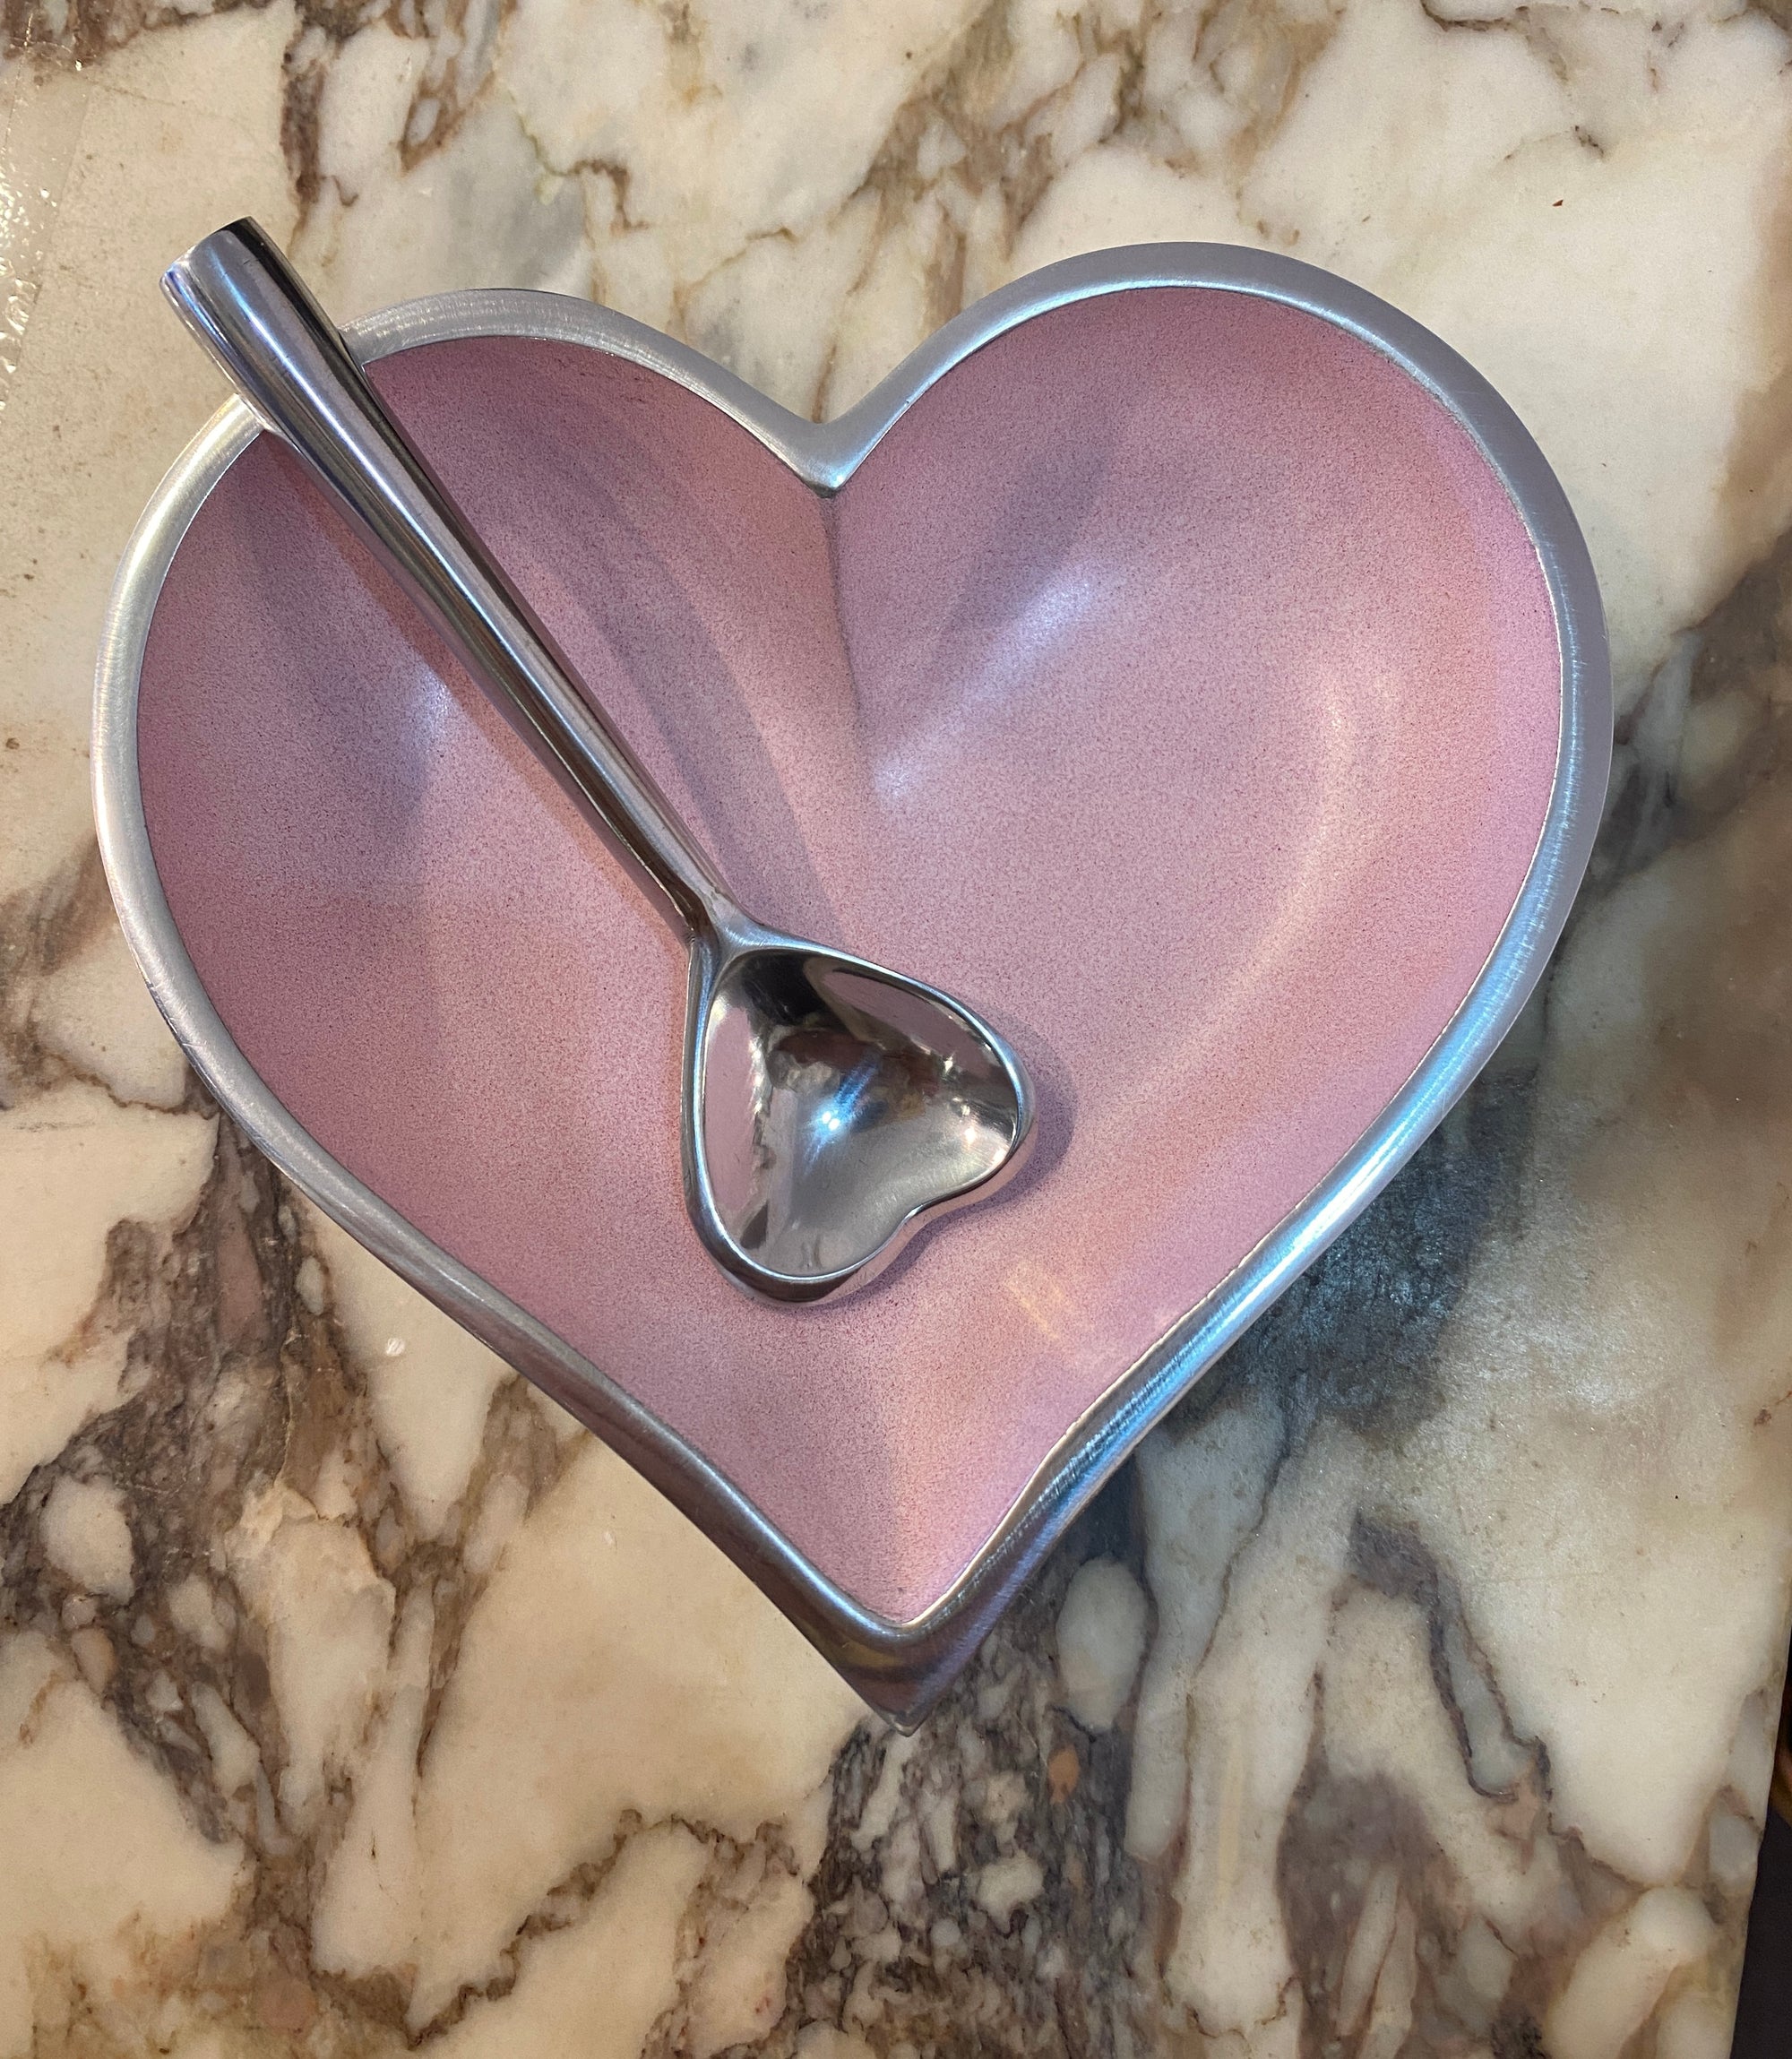 Heart Dish with Spoon